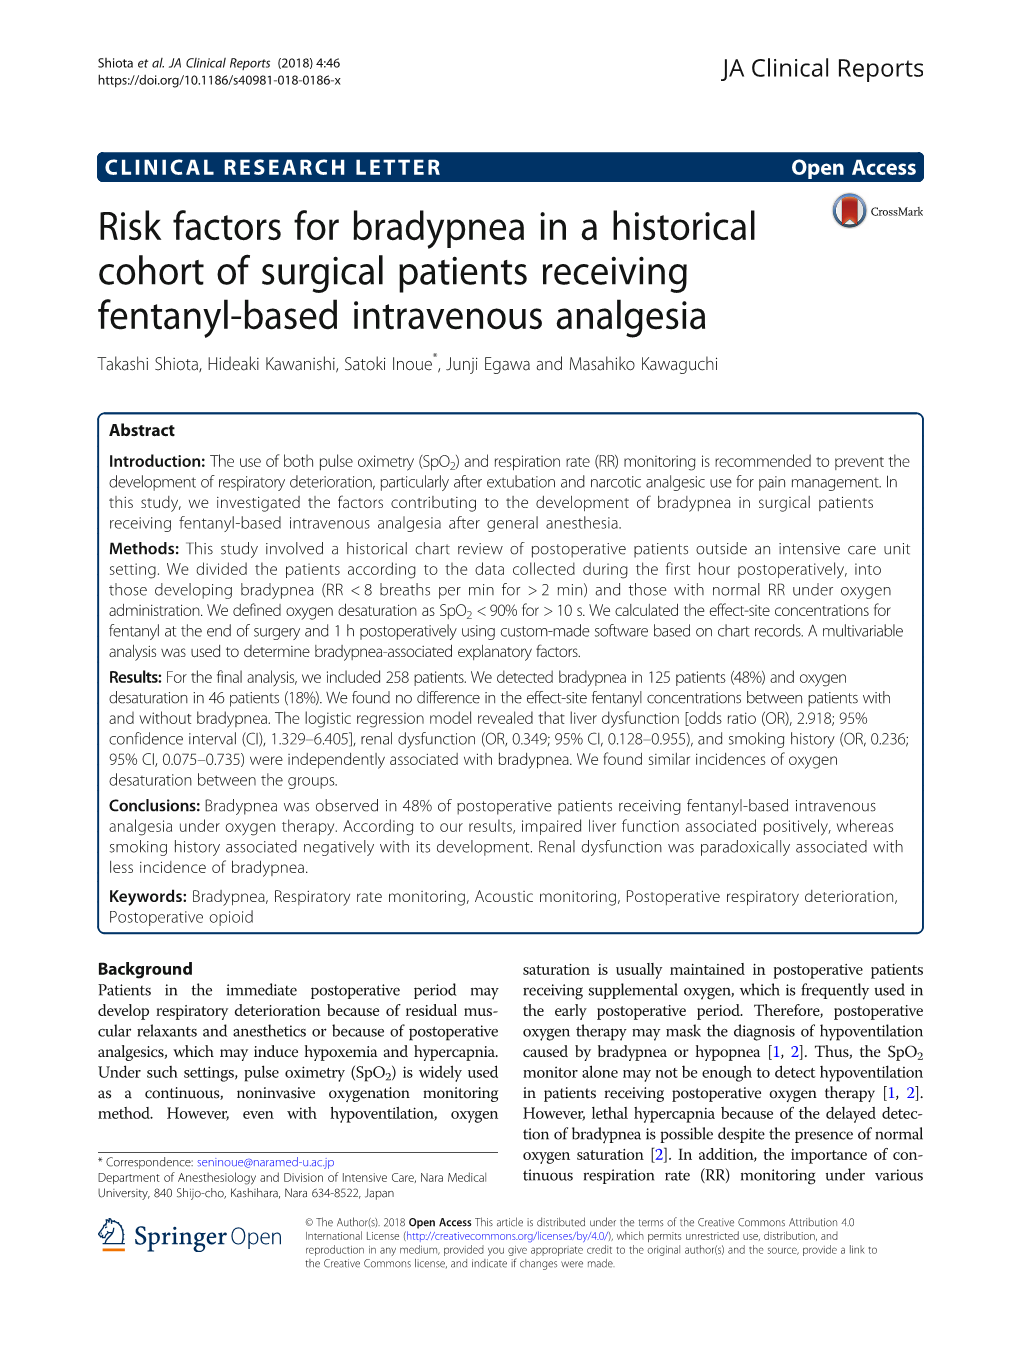 Risk Factors for Bradypnea in a Historical Cohort of Surgical Patients